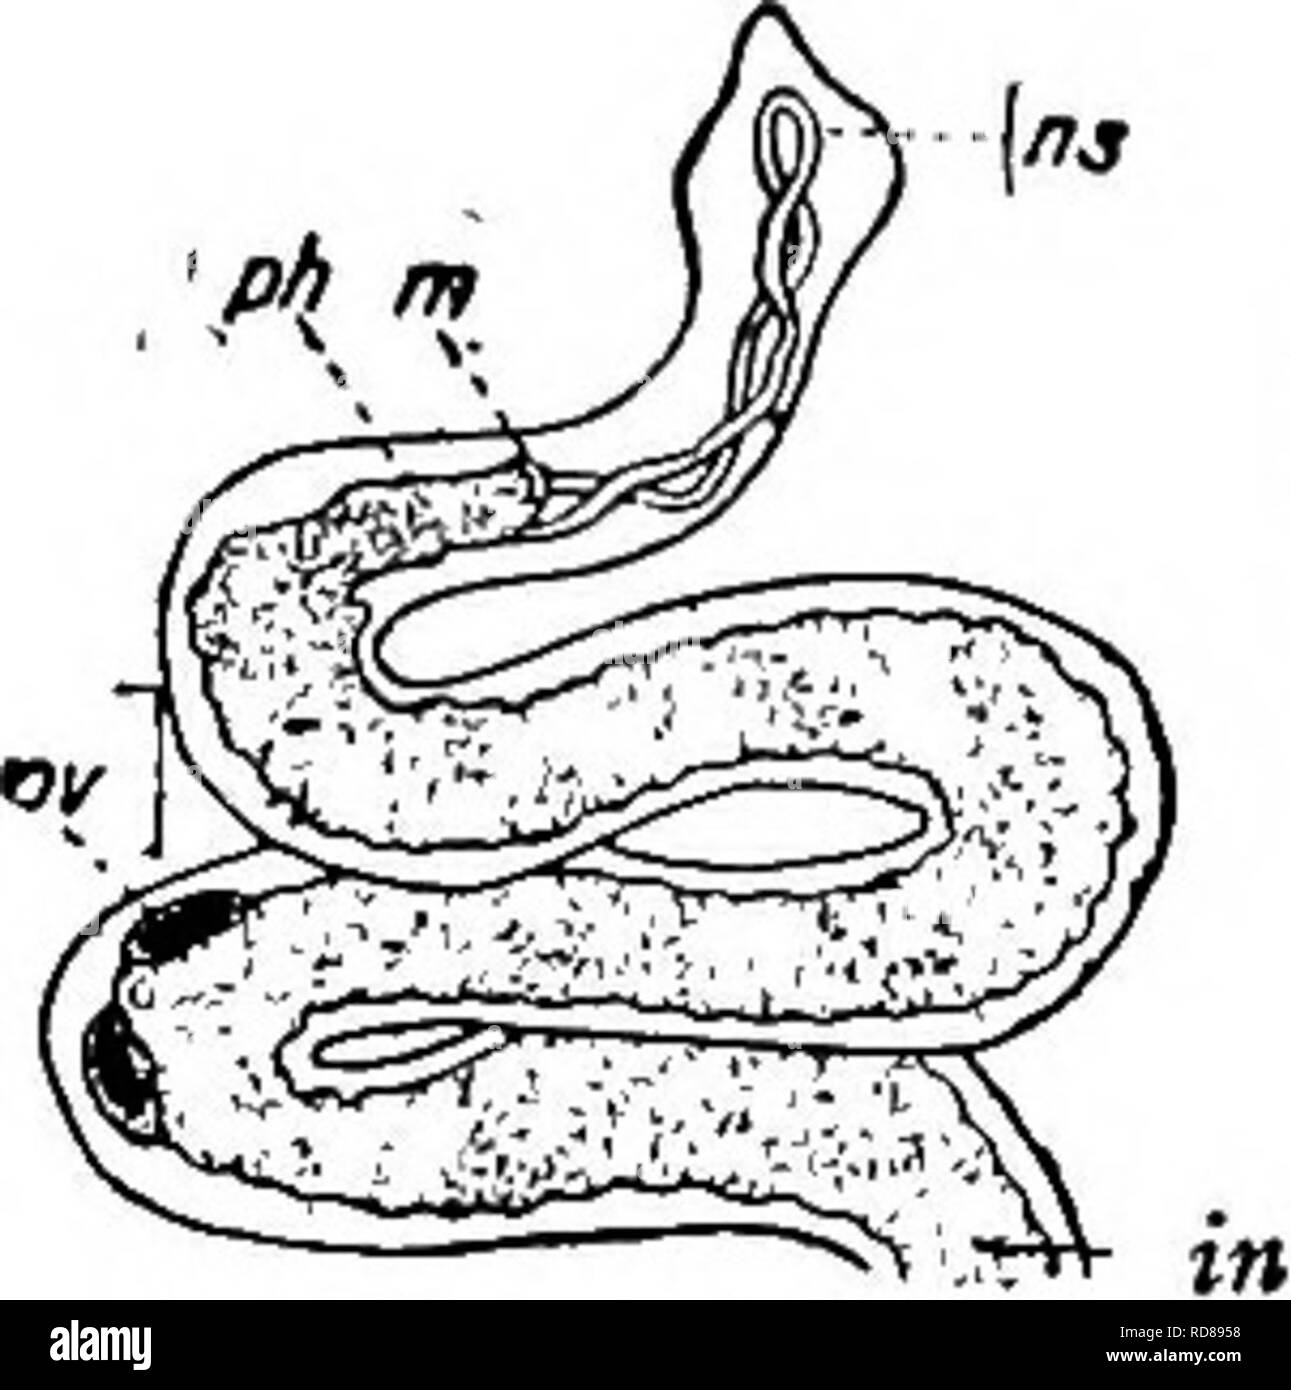 . Fresh-water biology. Freshwater biology. THE FREE-LIVING FLATWORMS (TURBELLARIA) 337. i8 (9) Head region distinct from rest of bodjf. Stenostomum coluber Leydig 1854. Length 6 mm. Width about one-thirtieth the length. Very slender, white, thread-like with snake-like movements. Head region broader than the rest of the body with blunt point at anterior end. Posterior end abruptly rounded. Asexual reproduction not known. Brackish water, Falmouth, Mass. Fro. 597. Stenoslomum coluber. Anterior end: m, mouth; ^A, pharynx; in, intestine; ov, egg (?); ns, protonephridium. X 20. (After Leydig.) * (8) Stock Photo